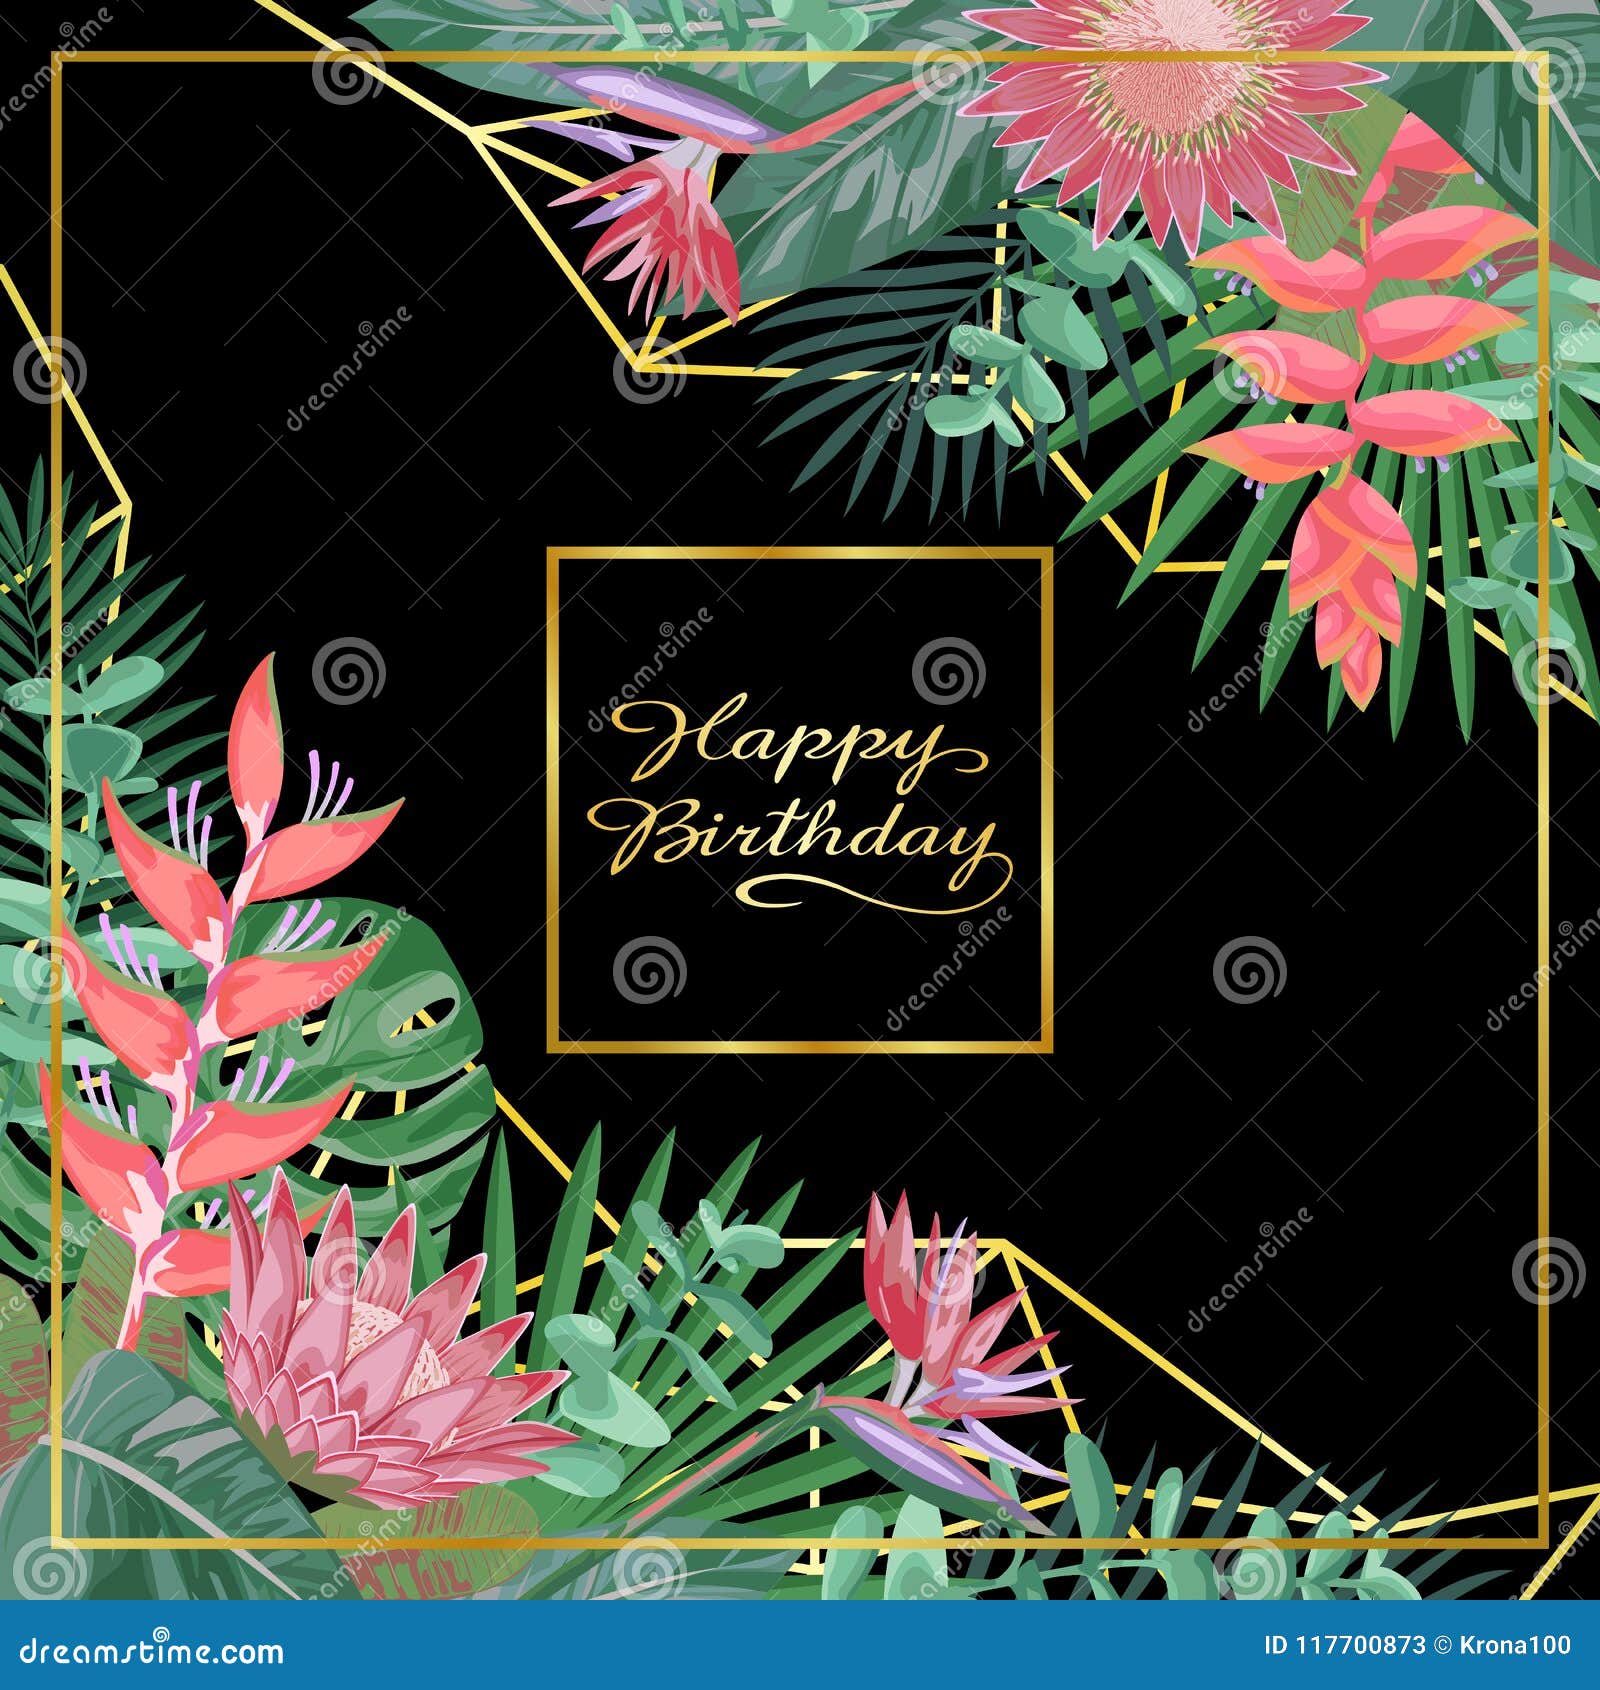 Tropical Happy Birthday Card Stock Vector Illustration Of Floral Flower